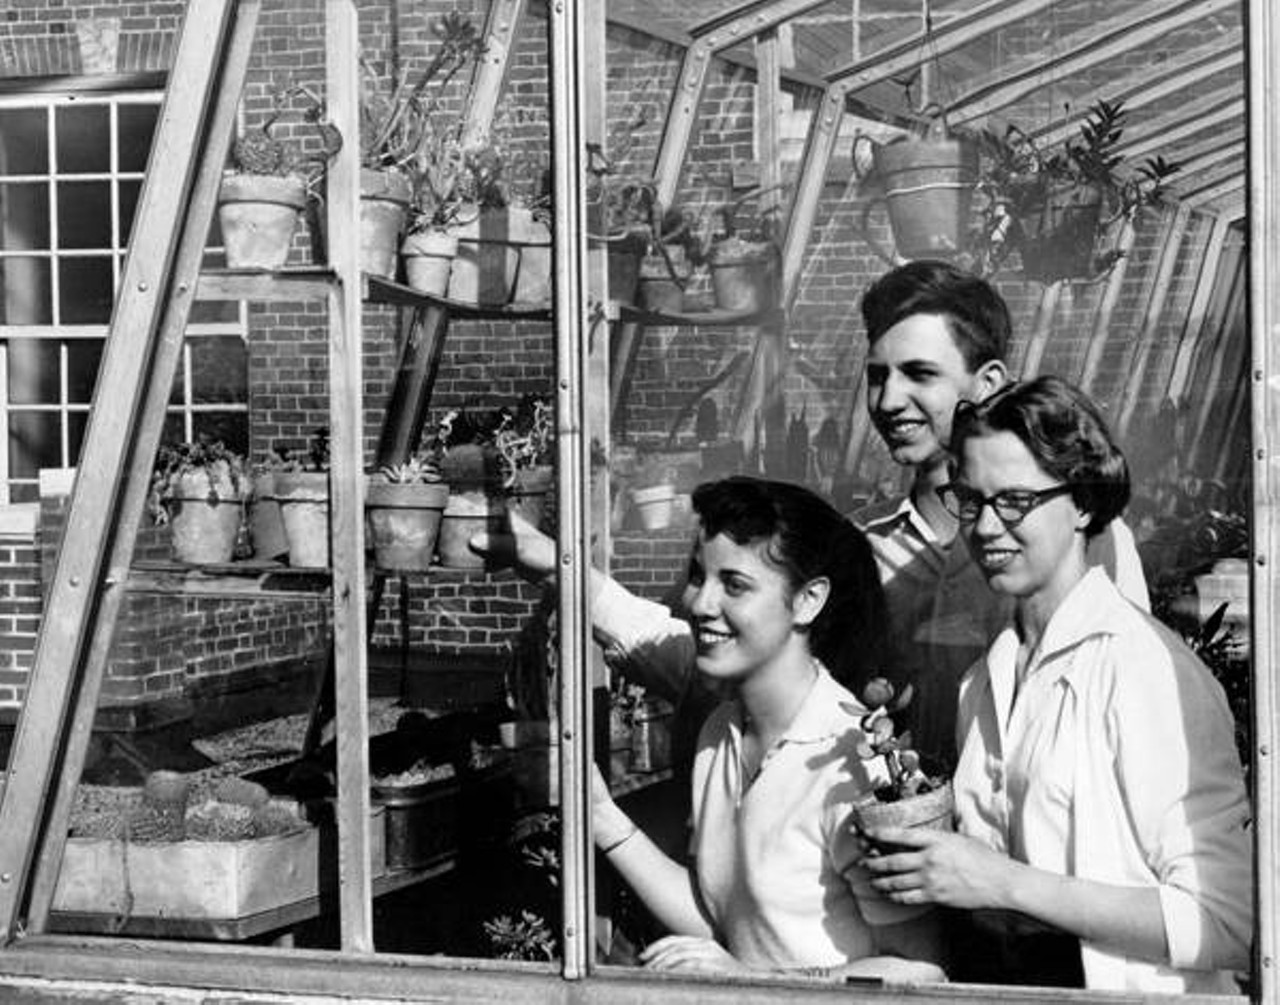 Caring for plants in the greenhouse on the roof of Shaker Heights High, 1956